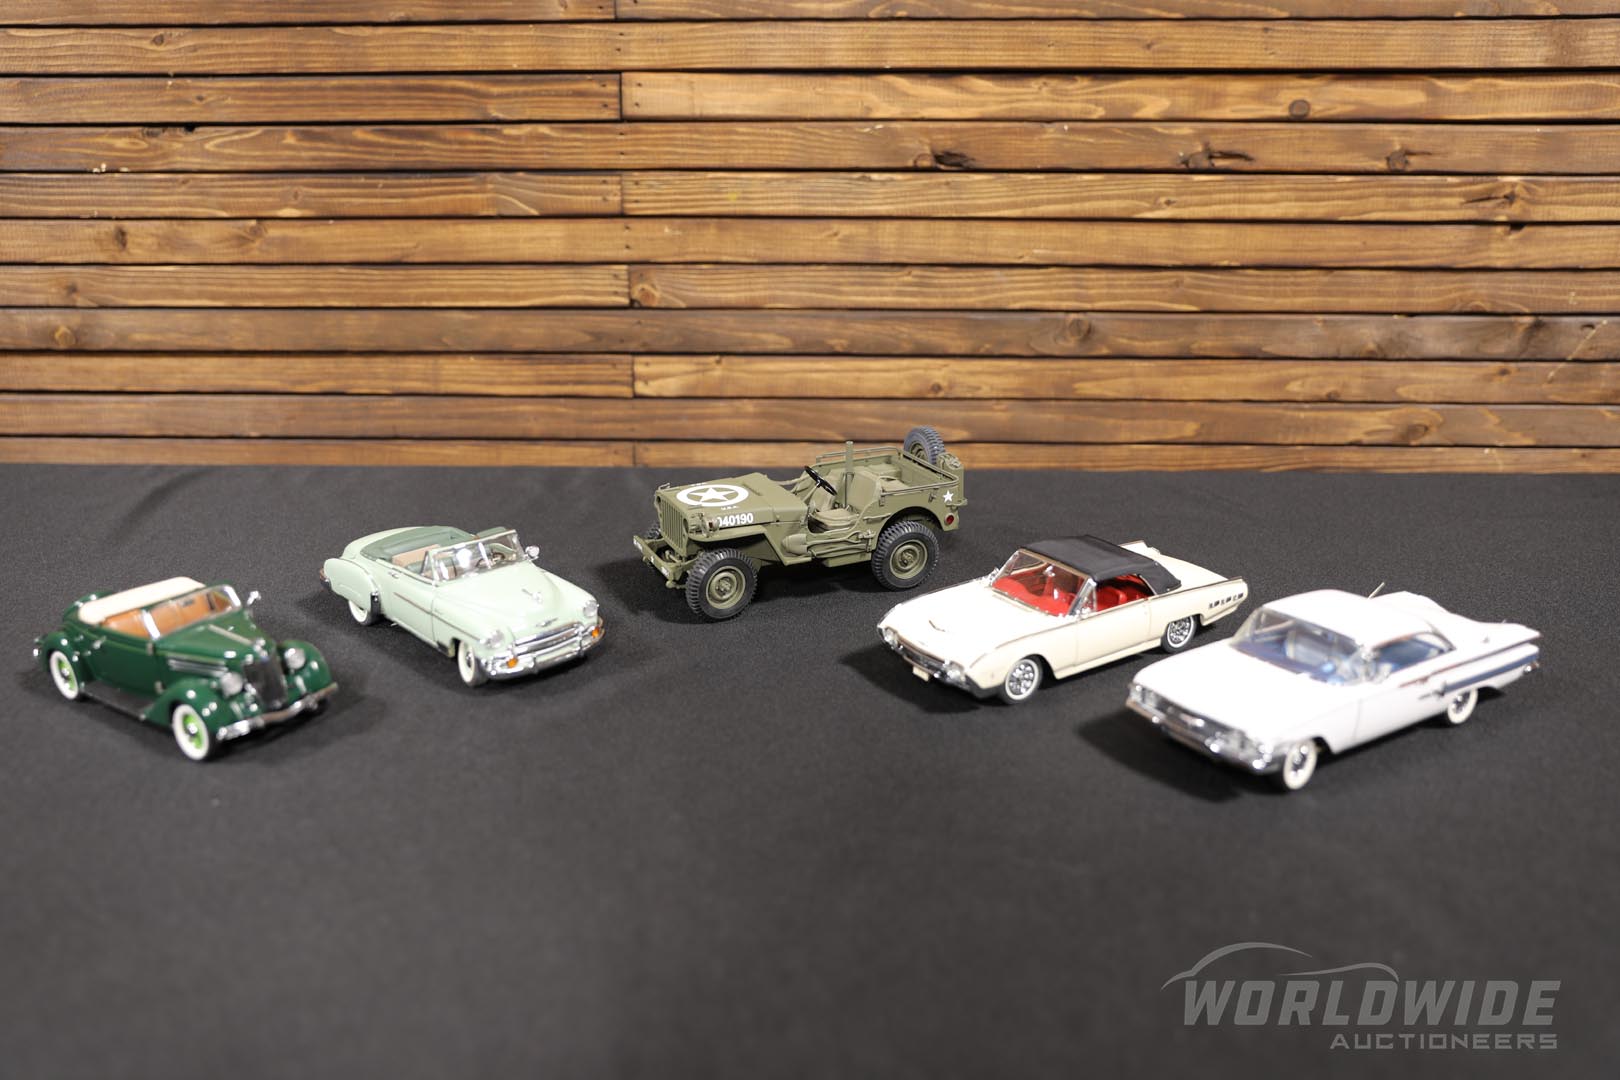 Collection of Five Quality Die-Cast Automobile Models from Franklin Mint and Danbury Mint